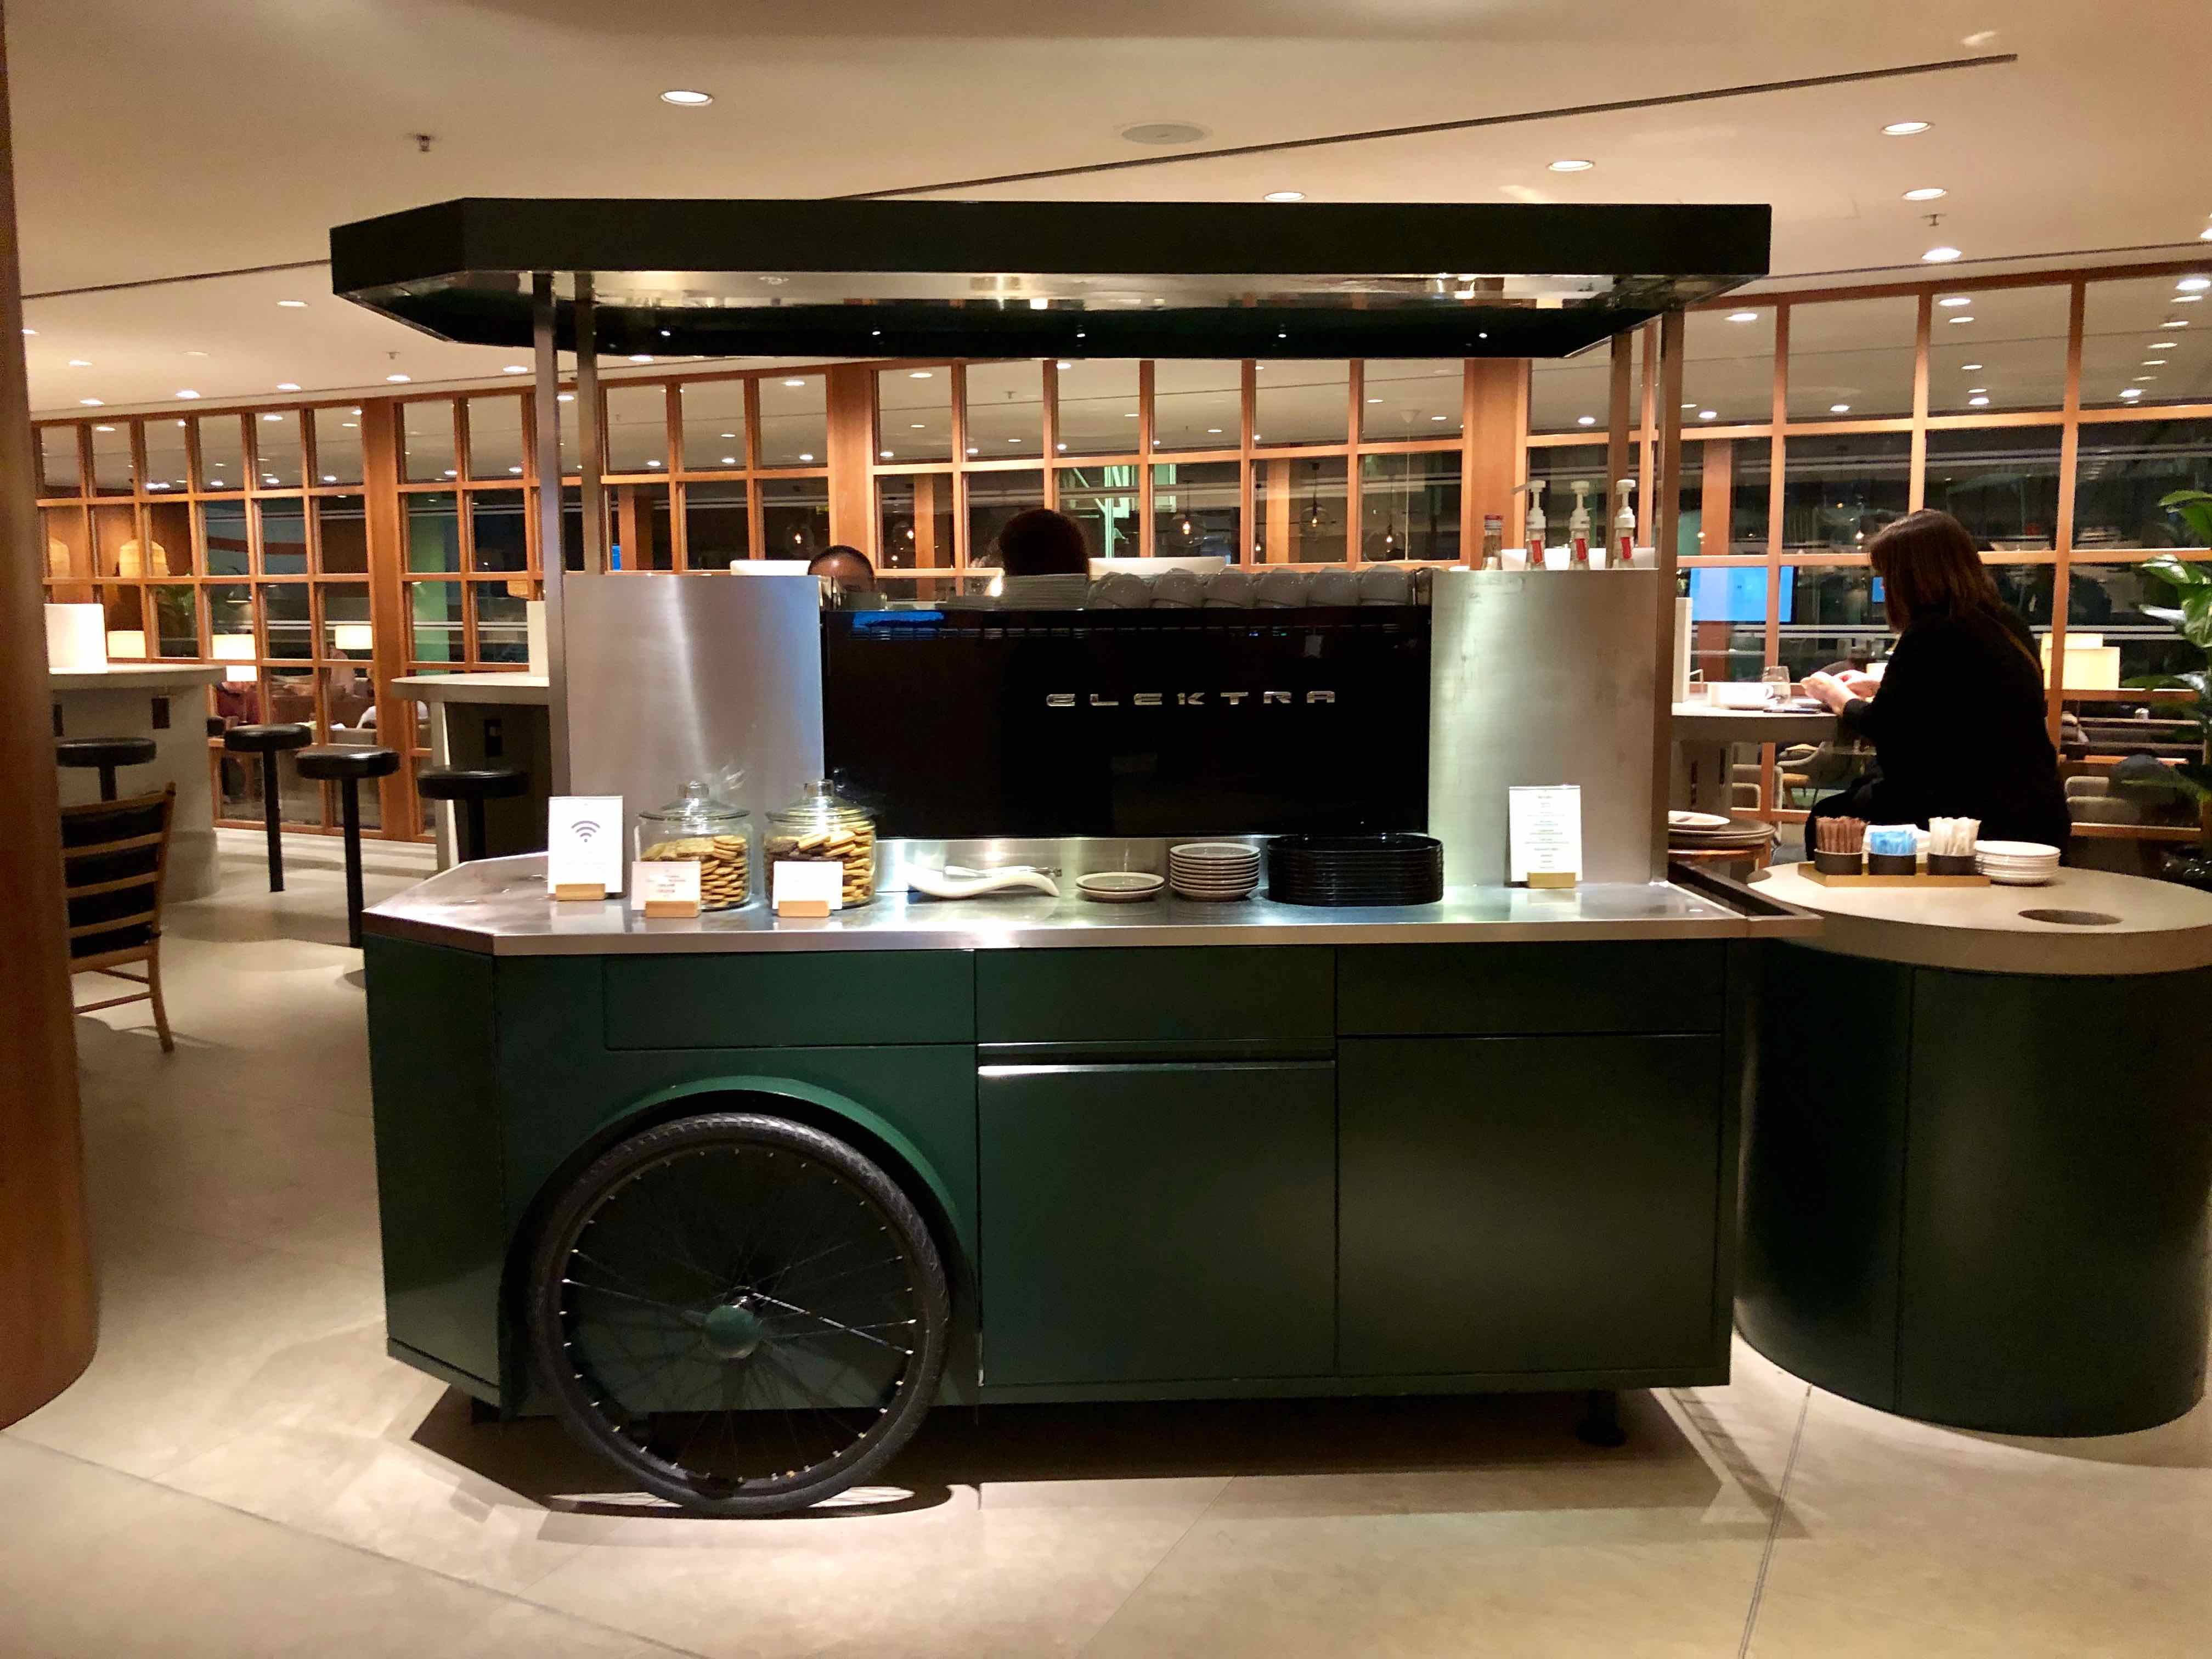 Cathay Pacific The Pier Business Class Lounge Hong Kong Barista coffee cart